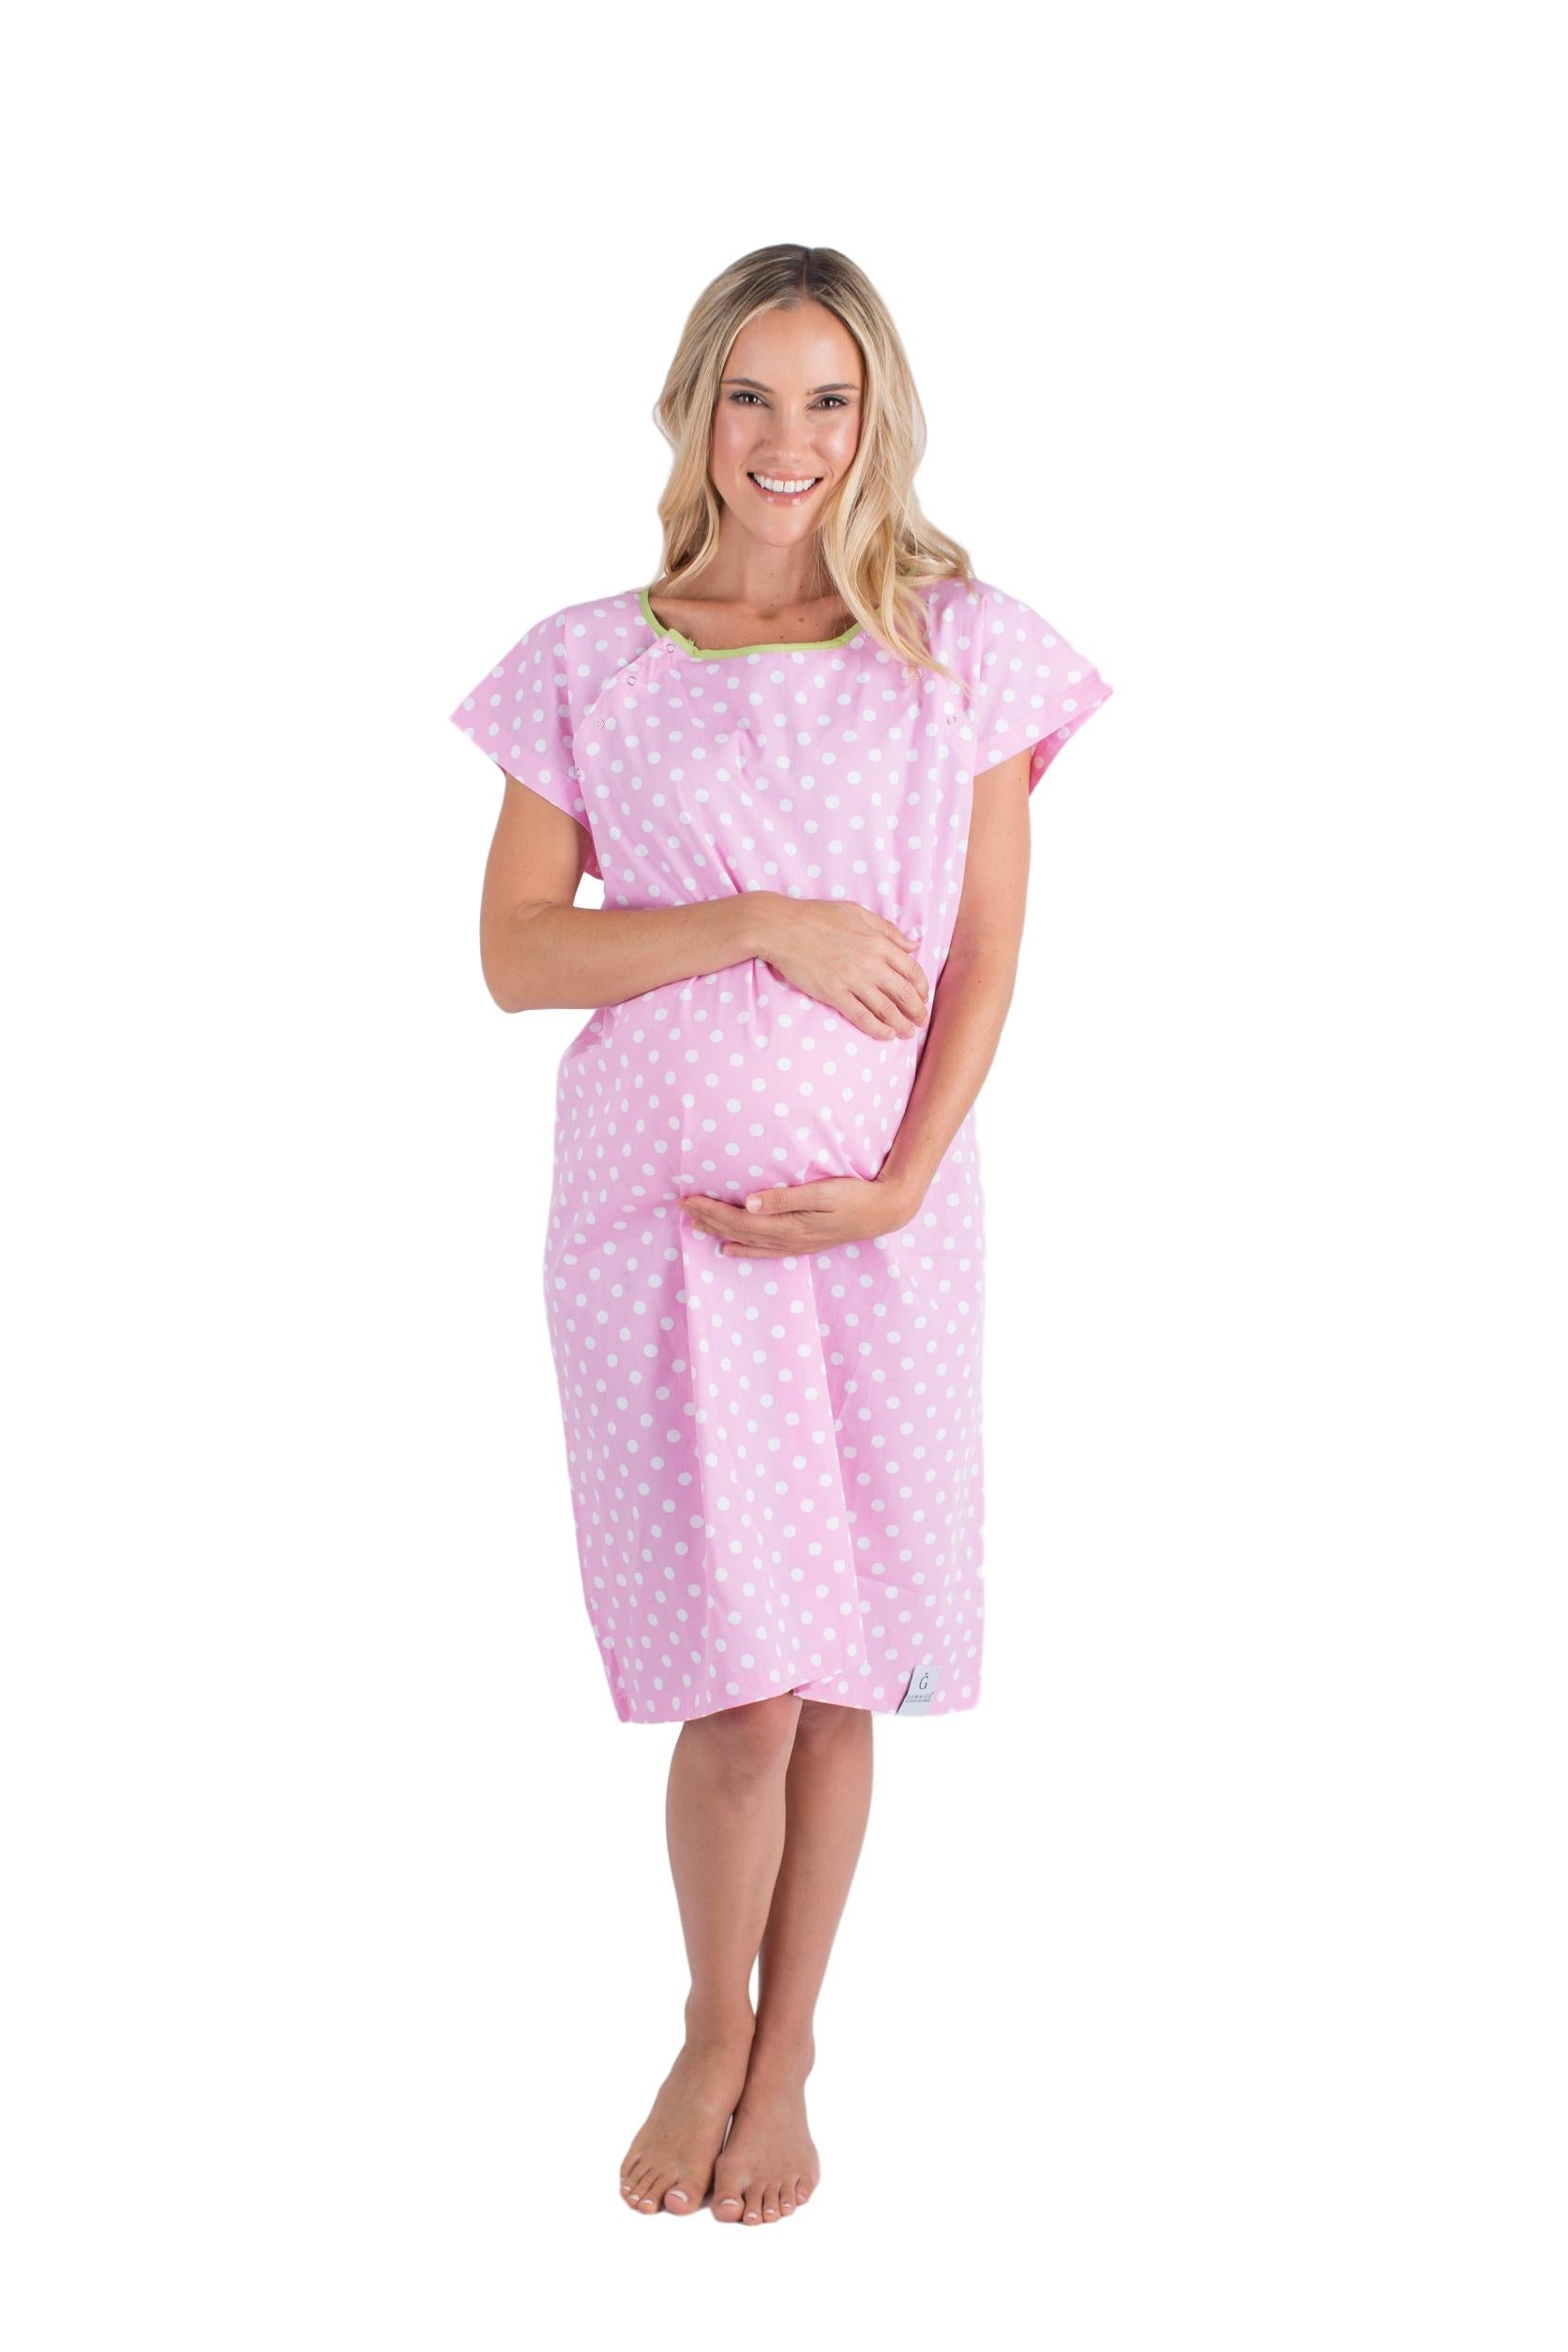 Baby Be Mine Maternity Labor Delivery Nursing Robe Hospital Bag Must Have -  Born in Ecstasy